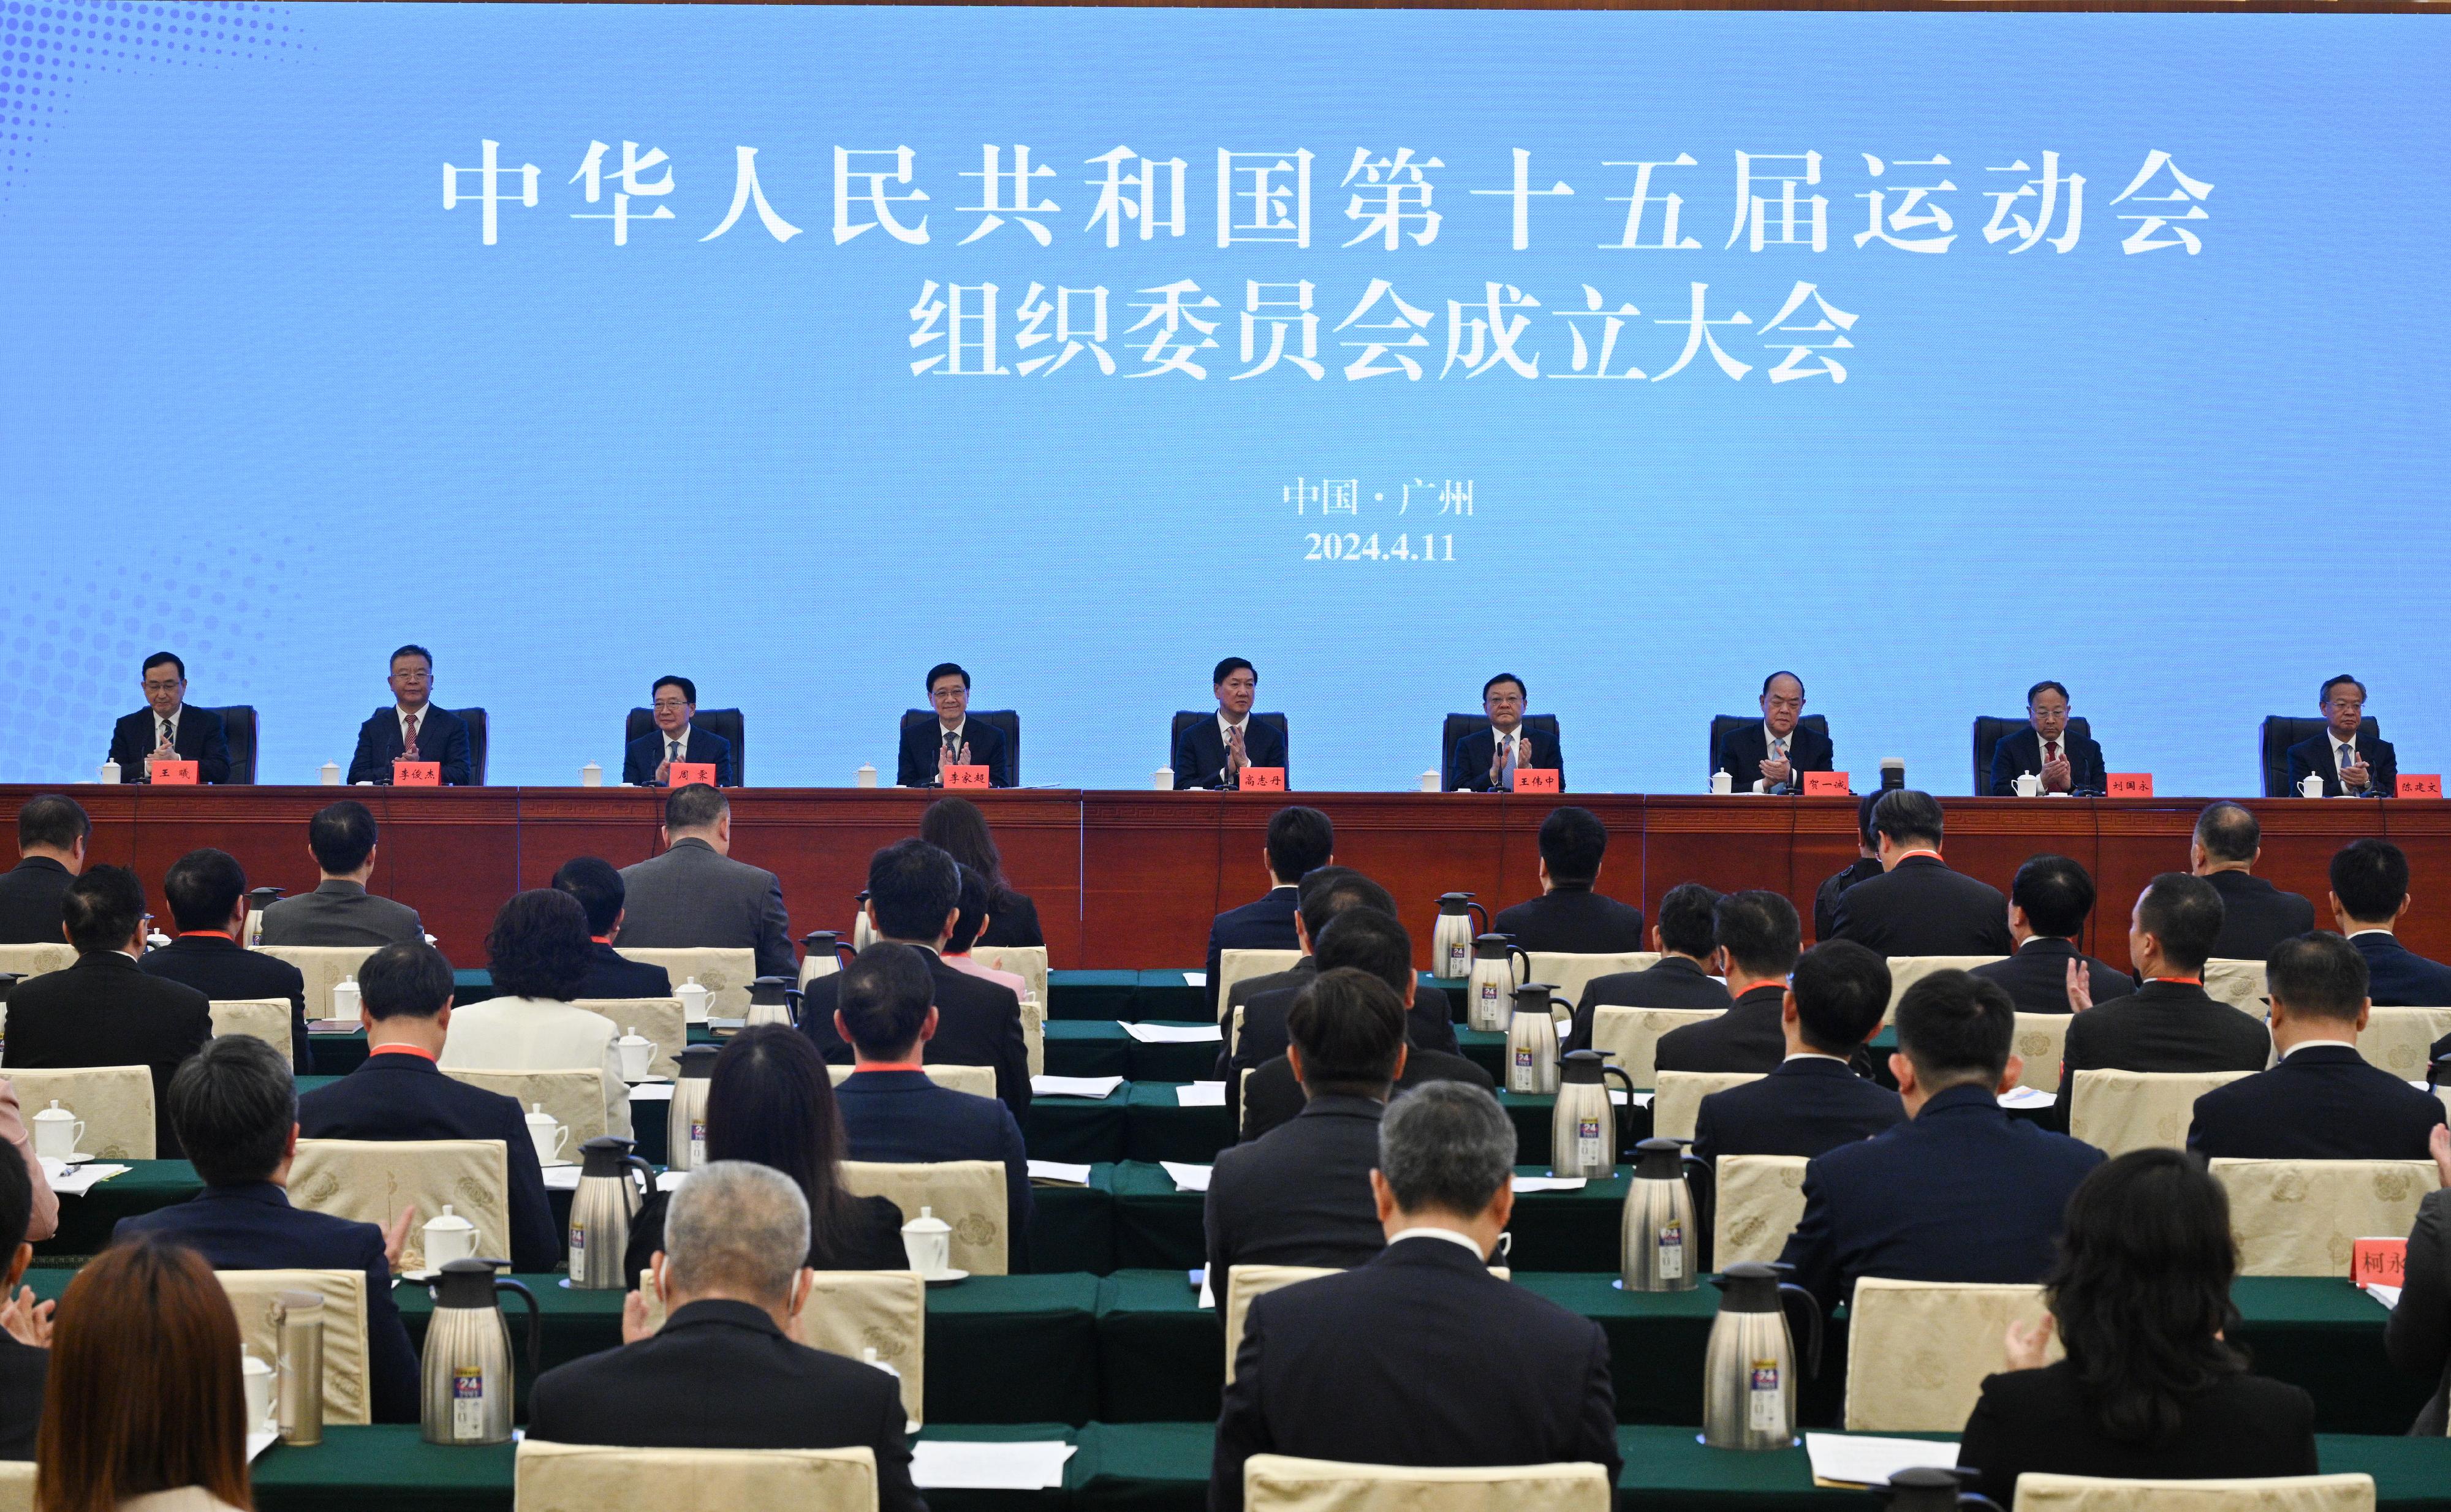 The Chief Executive, Mr John Lee, attended the inaugural meeting of the Organising Committee of the 15th National Games and the inaugural meeting of the Organising Committee of the 12th National Games for Persons with Disabilities and the 9th National Special Olympic Games in Guangzhou today (April 11). Photo shows Mr Lee (fourth left) participating in the inaugural meeting of the Organising Committee of the 15th National Games.